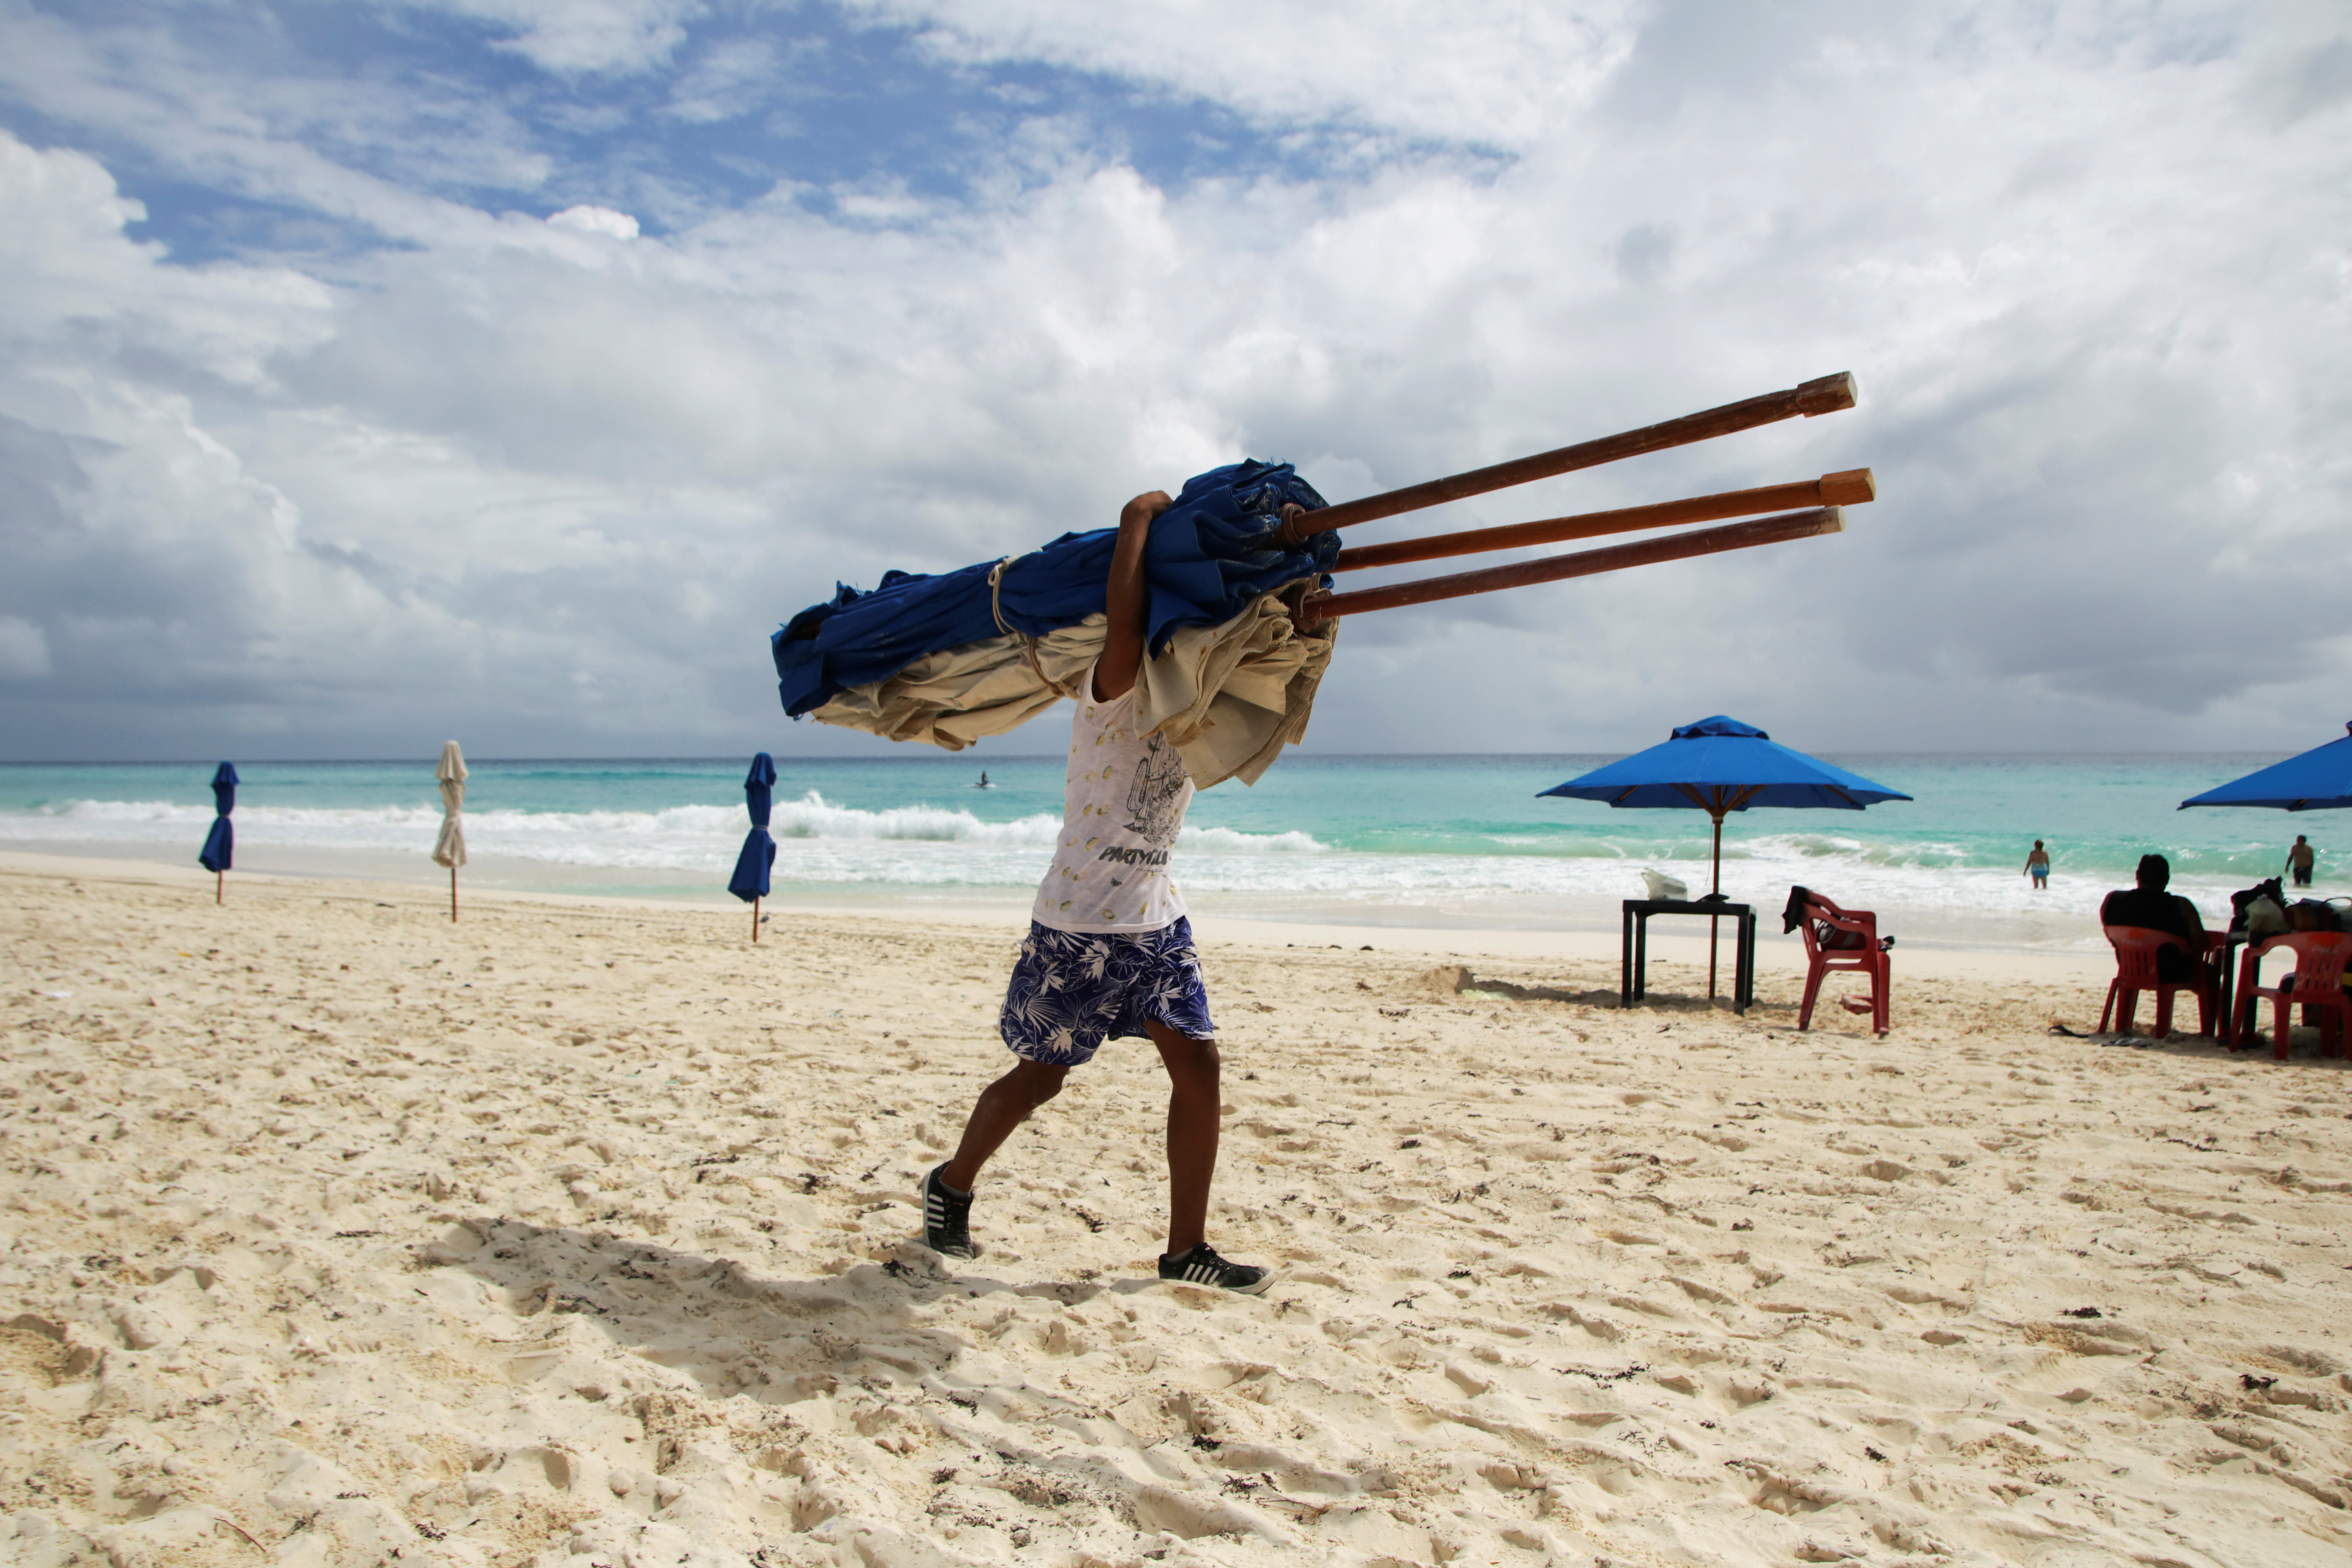 A hotel employee removes beach umbrellas from a beach in preparation for the arrival of Hurricane Delta, in Cancun, Mexico October 6, 2020. REUTERS/Jorge Delgado